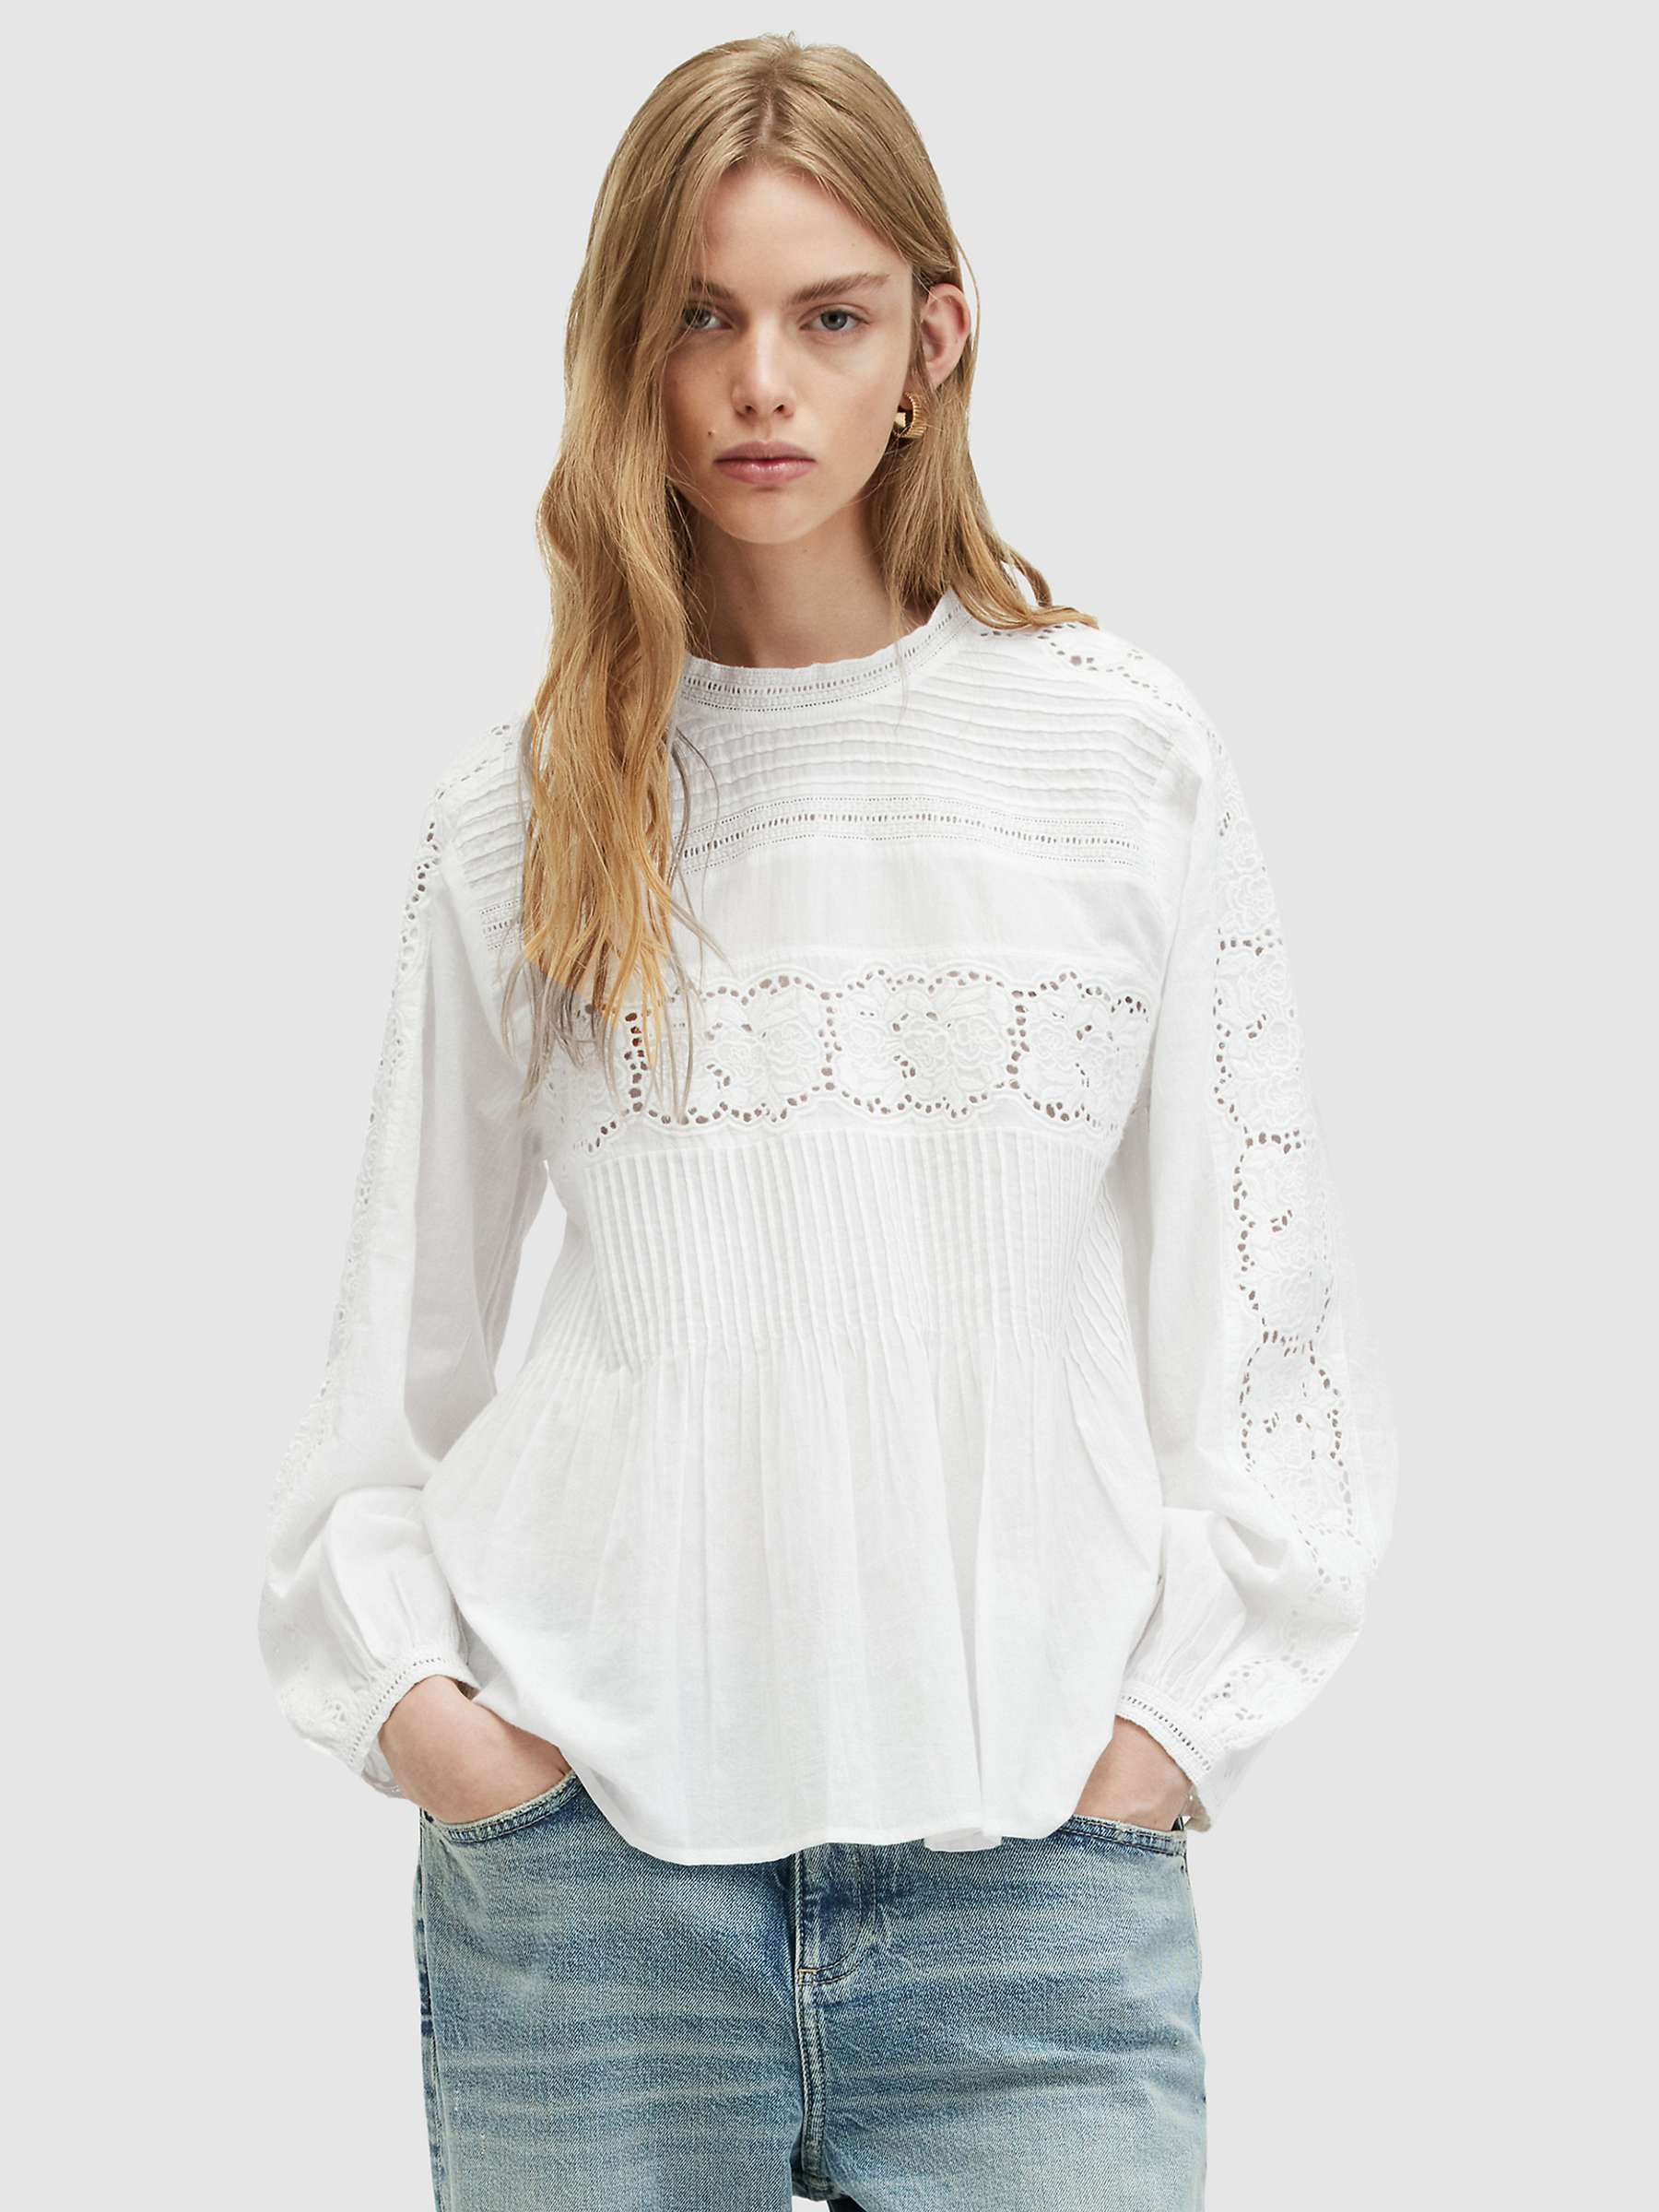 Buy AllSaints Elaia Embroidered Blouse, Chalk White Online at johnlewis.com